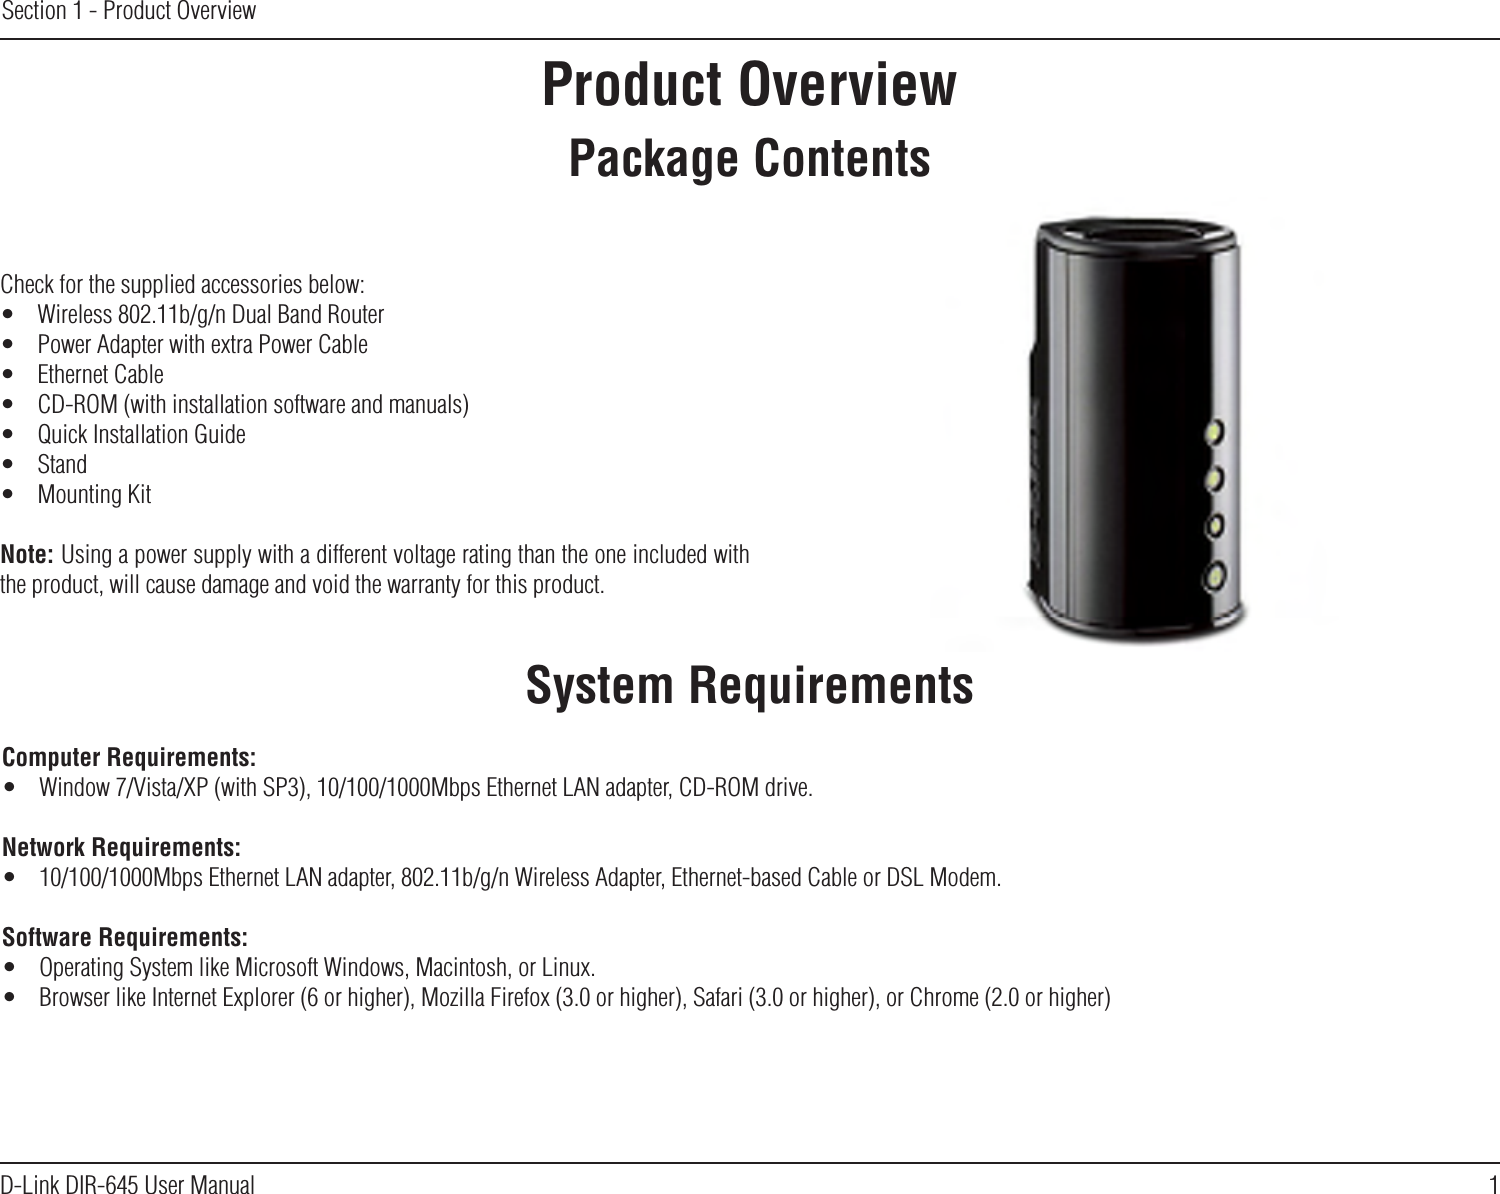 1D-Link DIR-645 User ManualSection 1 - Product OverviewProduct OverviewPackage ContentsSystem RequirementsCheck for the supplied accessories below:•  Wireless 802.11b/g/n Dual Band Router•  Power Adapter with extra Power Cable•  Ethernet Cable•  CD-ROM (with installation software and manuals)•  Quick Installation Guide•  Stand•  Mounting KitNote: Using a power supply with a different voltage rating than the one included with the product, will cause damage and void the warranty for this product.Computer Requirements:•  Window 7/Vista/XP (with SP3), 10/100/1000Mbps Ethernet LAN adapter, CD-ROM drive.Network Requirements:•  10/100/1000Mbps Ethernet LAN adapter, 802.11b/g/n Wireless Adapter, Ethernet-based Cable or DSL Modem.Software Requirements:•  Operating System like Microsoft Windows, Macintosh, or Linux.•  Browser like Internet Explorer (6 or higher), Mozilla Firefox (3.0 or higher), Safari (3.0 or higher), or Chrome (2.0 or higher)